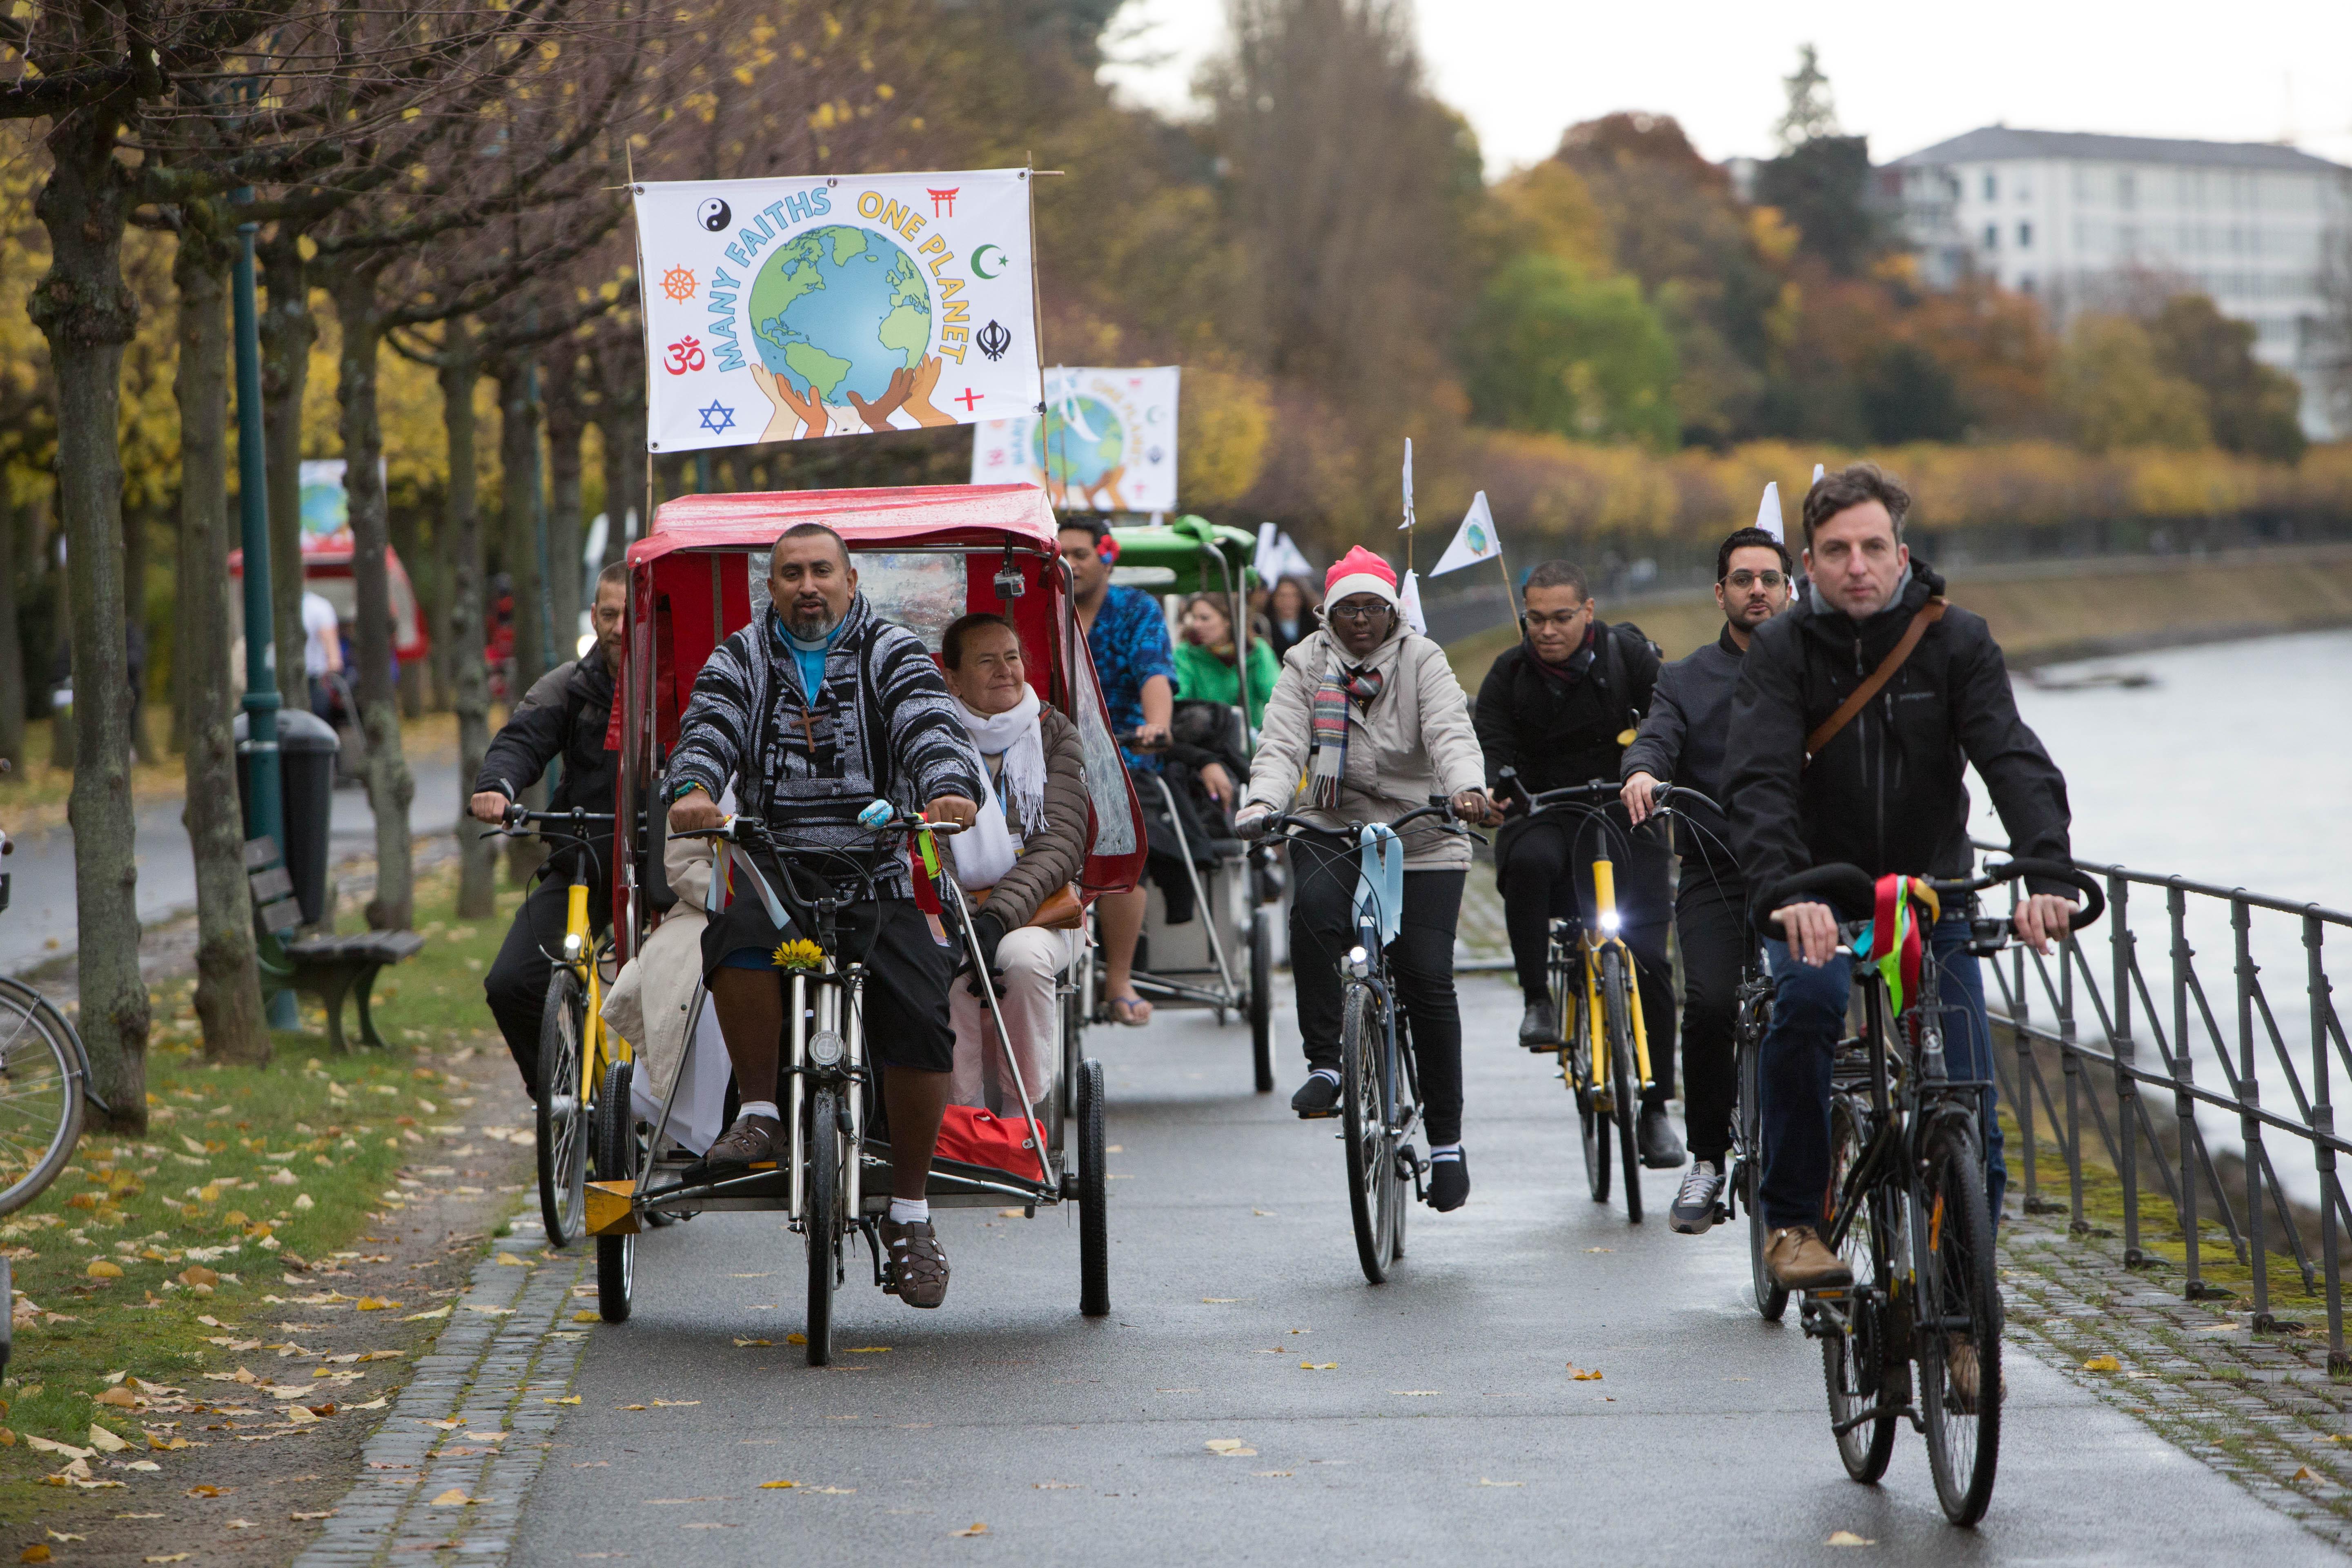 Joint engagement for justice: Interfaith bicycle demonstration at the climate conference in Bonn in 2017. Photo: Sean Hawkey/WCC